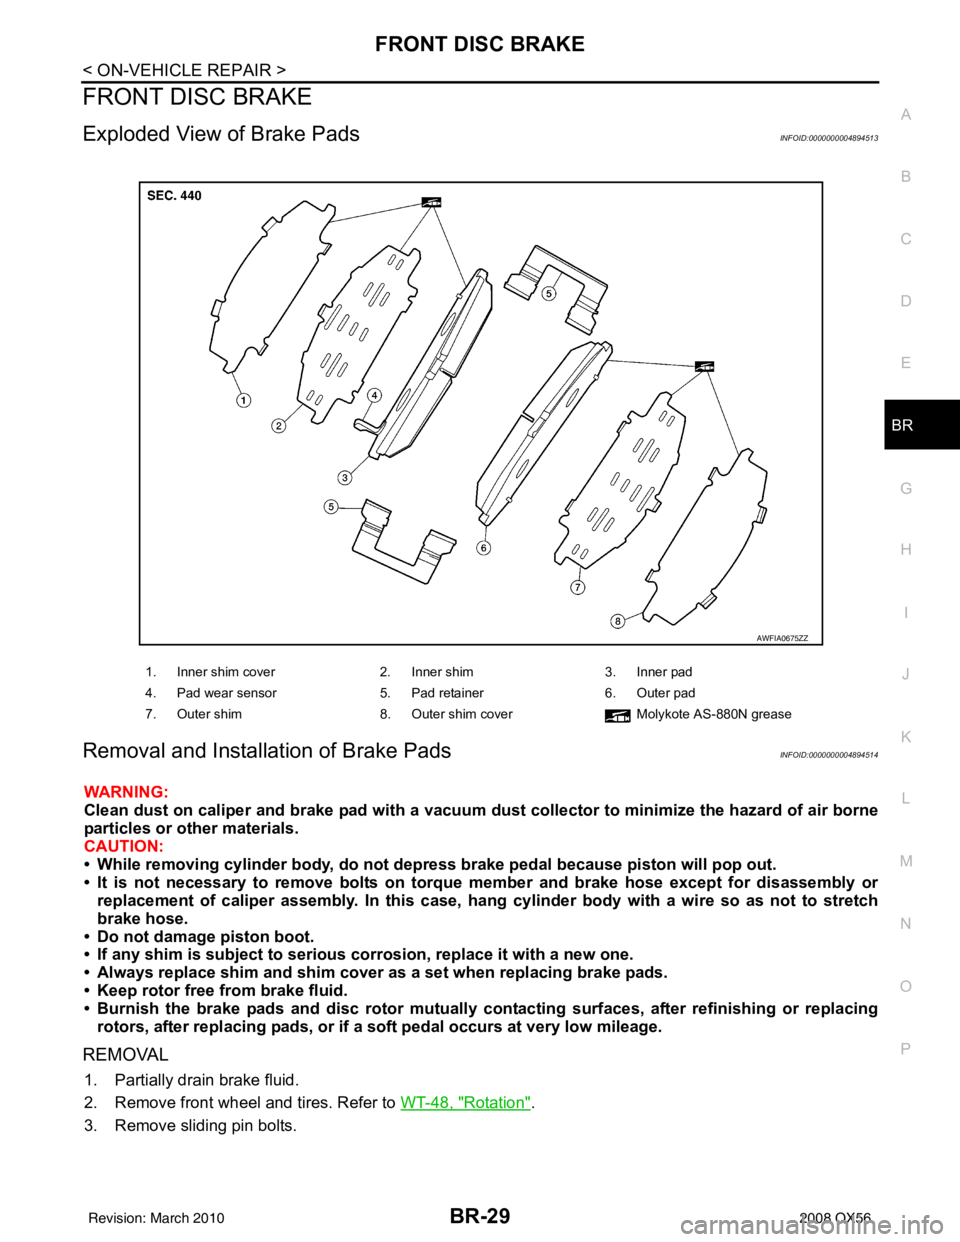 INFINITI QX56 2008  Factory Service Manual FRONT DISC BRAKEBR-29
< ON-VEHICLE REPAIR >
C
DE
G H
I
J
K L
M A
B
BR
N
O P
FRONT DISC BRAKE
Exploded View of Brake PadsINFOID:0000000004894513
Removal and Installation of Brake PadsINFOID:00000000048